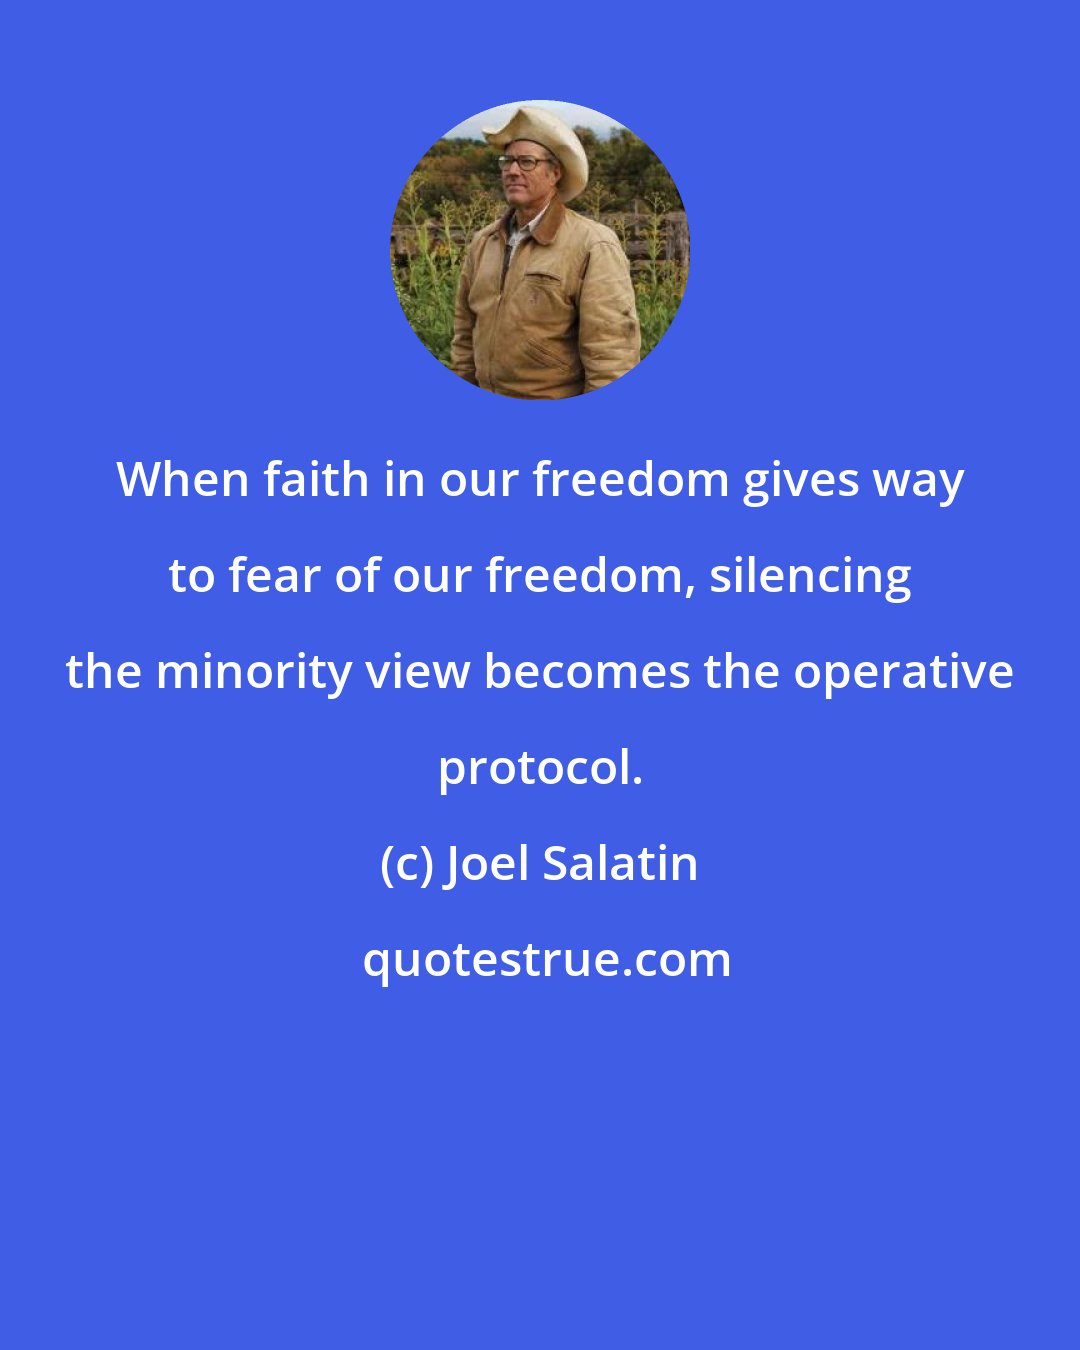 Joel Salatin: When faith in our freedom gives way to fear of our freedom, silencing the minority view becomes the operative protocol.